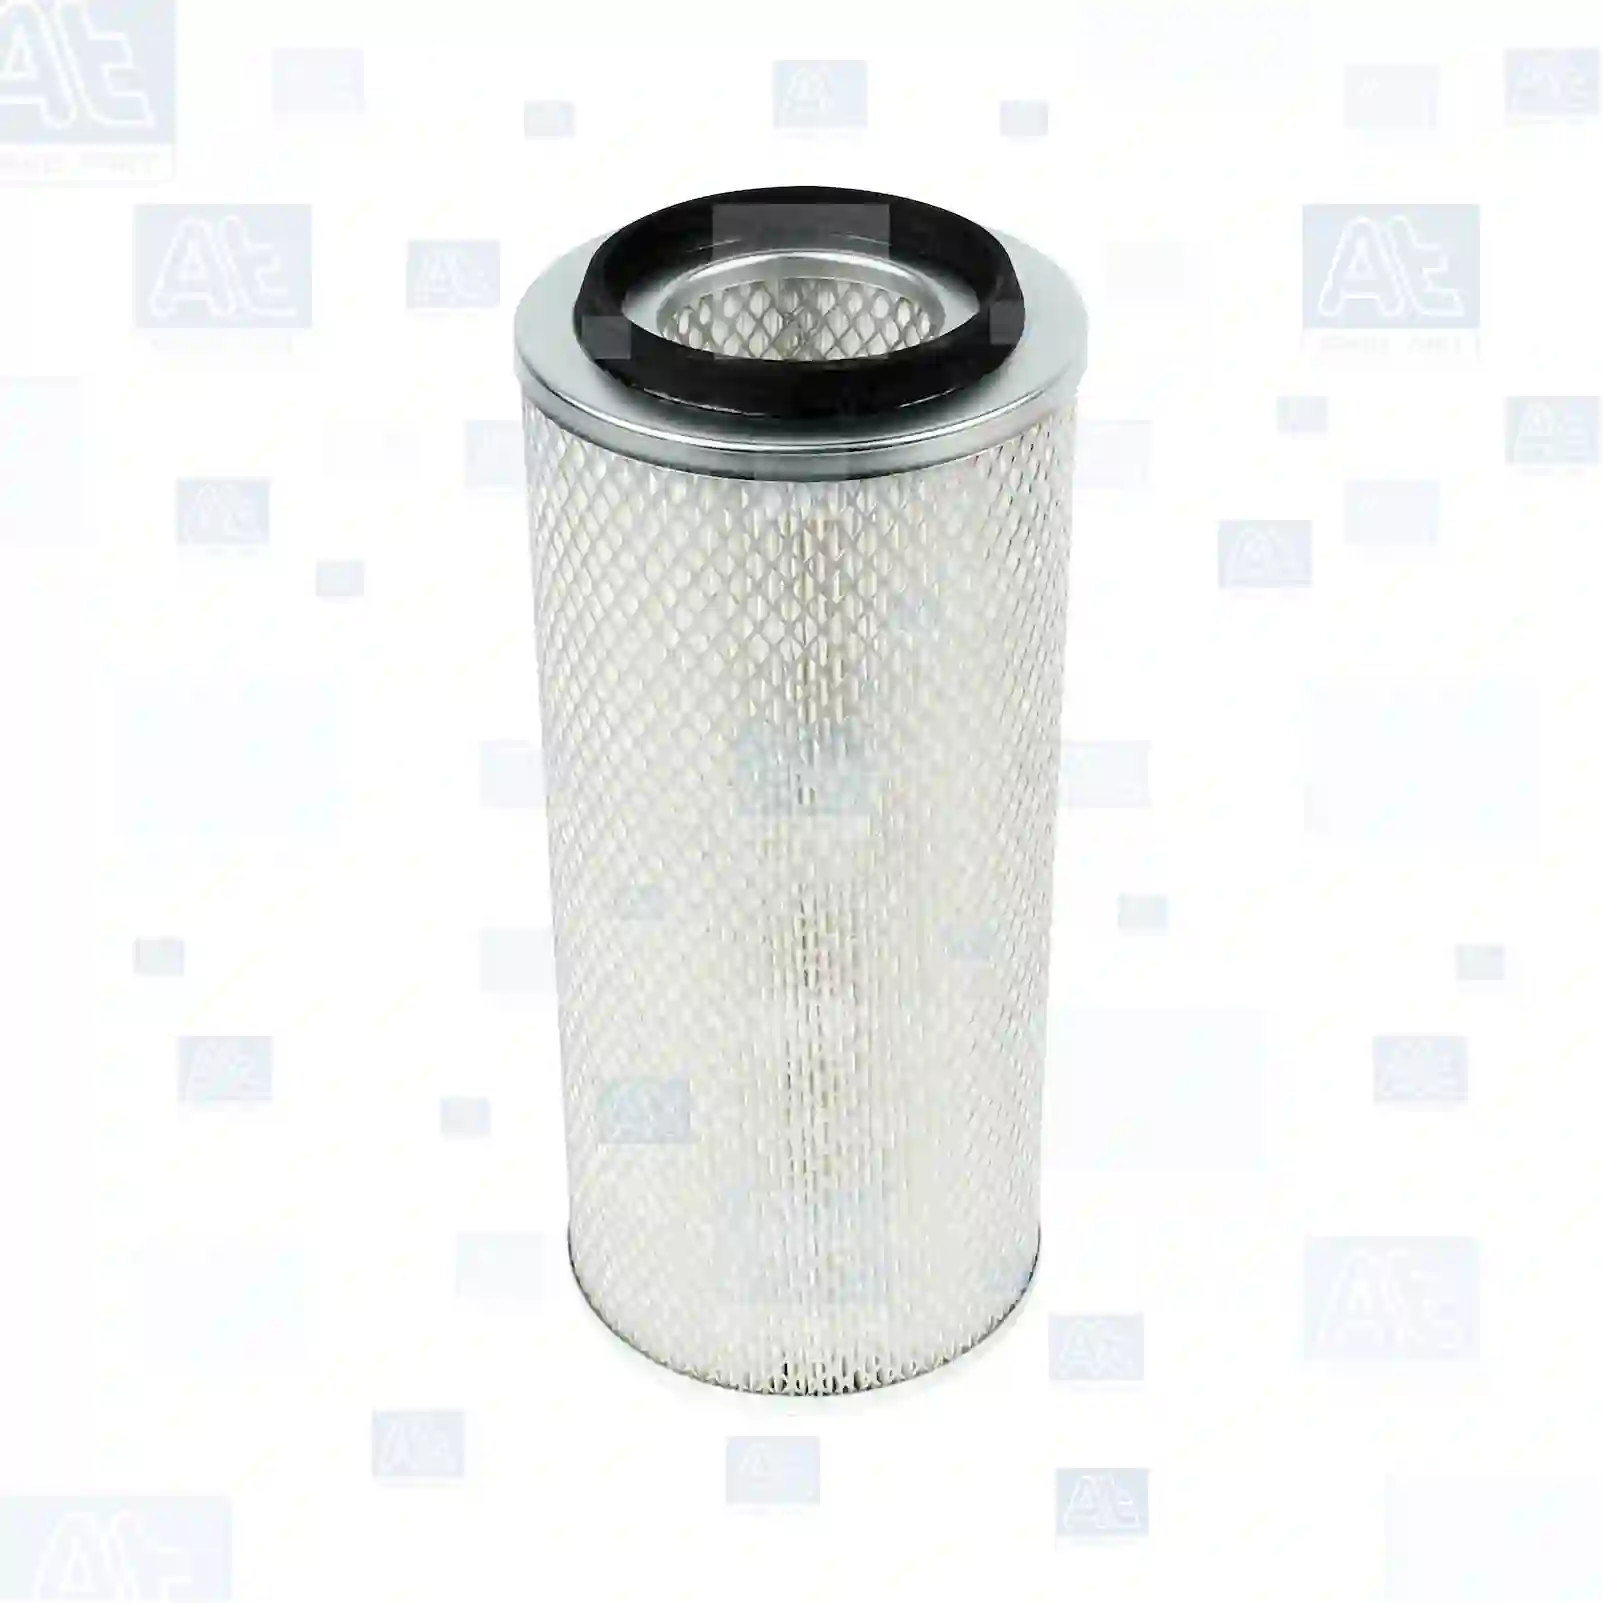 Air filter, 77706193, 6006001345009, T06129620, 145412A1, 3146576, 3146576R1, 3I-0837, 9974133, 10948204, 20943404, 0007235610, 0007235611, 1500199, 691733, BBU6549, 07330074, 687745, 68774500, 956591, 95659100, 01902101, 02165038, 02165039, 1111401910300, 1210602017700, 905412970014, 27059900, 634479, 5106022072, 1111401910300, 1210602017700, 2165039, 0746725, 2165039, F178200090010, G178200090010, 9839014, 01902101, 01902121, 01904581, 02165038, 02165039, 09927846, 09985779, Y05767209, Y05769012, 5011304, 5011314, 5011547, 90137364, 9974133, 9059547, 93240236, 9974133, 0009839014, 2954346M1, 3146576R1, 00634479, 01902101, 01902121, 01904581, 02165038, 02165039, 09927846, 09985779, 1902101, 1904581, 2165039, 42553200, 500038758, 503471098, 75204063, 9927846, 9985779, AZ18968, 02165038, 02165039, 0009930706, LA913, 35873-1121-1, 5106180, 7002403, 04516555224, 04516592304, 1887575M91, 2710804, 2954346M1, 0010948204, 0020943404, 0030943204, 0040948004, 8319130156, 3146576R1, 16546-G9601, 842284, 634479, 931465576R1, 93146576R1, 2710804M1, 250590, F0250590, F250590, 41185190010, 905412970014, 0003563570, 5430028794, 6005019673, R804, 5106180, BBU6549, 8319130156, SA6028, 141185190010, 41105190703, 41185190010, 44185190010, 27059900, 17700-98004, 17700-98005, 17811-98003, 16546G9601, 800619, 82640300, CH12231, T06129620, ZG00863-0008 ||  77706193 At Spare Part | Engine, Accelerator Pedal, Camshaft, Connecting Rod, Crankcase, Crankshaft, Cylinder Head, Engine Suspension Mountings, Exhaust Manifold, Exhaust Gas Recirculation, Filter Kits, Flywheel Housing, General Overhaul Kits, Engine, Intake Manifold, Oil Cleaner, Oil Cooler, Oil Filter, Oil Pump, Oil Sump, Piston & Liner, Sensor & Switch, Timing Case, Turbocharger, Cooling System, Belt Tensioner, Coolant Filter, Coolant Pipe, Corrosion Prevention Agent, Drive, Expansion Tank, Fan, Intercooler, Monitors & Gauges, Radiator, Thermostat, V-Belt / Timing belt, Water Pump, Fuel System, Electronical Injector Unit, Feed Pump, Fuel Filter, cpl., Fuel Gauge Sender,  Fuel Line, Fuel Pump, Fuel Tank, Injection Line Kit, Injection Pump, Exhaust System, Clutch & Pedal, Gearbox, Propeller Shaft, Axles, Brake System, Hubs & Wheels, Suspension, Leaf Spring, Universal Parts / Accessories, Steering, Electrical System, Cabin Air filter, 77706193, 6006001345009, T06129620, 145412A1, 3146576, 3146576R1, 3I-0837, 9974133, 10948204, 20943404, 0007235610, 0007235611, 1500199, 691733, BBU6549, 07330074, 687745, 68774500, 956591, 95659100, 01902101, 02165038, 02165039, 1111401910300, 1210602017700, 905412970014, 27059900, 634479, 5106022072, 1111401910300, 1210602017700, 2165039, 0746725, 2165039, F178200090010, G178200090010, 9839014, 01902101, 01902121, 01904581, 02165038, 02165039, 09927846, 09985779, Y05767209, Y05769012, 5011304, 5011314, 5011547, 90137364, 9974133, 9059547, 93240236, 9974133, 0009839014, 2954346M1, 3146576R1, 00634479, 01902101, 01902121, 01904581, 02165038, 02165039, 09927846, 09985779, 1902101, 1904581, 2165039, 42553200, 500038758, 503471098, 75204063, 9927846, 9985779, AZ18968, 02165038, 02165039, 0009930706, LA913, 35873-1121-1, 5106180, 7002403, 04516555224, 04516592304, 1887575M91, 2710804, 2954346M1, 0010948204, 0020943404, 0030943204, 0040948004, 8319130156, 3146576R1, 16546-G9601, 842284, 634479, 931465576R1, 93146576R1, 2710804M1, 250590, F0250590, F250590, 41185190010, 905412970014, 0003563570, 5430028794, 6005019673, R804, 5106180, BBU6549, 8319130156, SA6028, 141185190010, 41105190703, 41185190010, 44185190010, 27059900, 17700-98004, 17700-98005, 17811-98003, 16546G9601, 800619, 82640300, CH12231, T06129620, ZG00863-0008 ||  77706193 At Spare Part | Engine, Accelerator Pedal, Camshaft, Connecting Rod, Crankcase, Crankshaft, Cylinder Head, Engine Suspension Mountings, Exhaust Manifold, Exhaust Gas Recirculation, Filter Kits, Flywheel Housing, General Overhaul Kits, Engine, Intake Manifold, Oil Cleaner, Oil Cooler, Oil Filter, Oil Pump, Oil Sump, Piston & Liner, Sensor & Switch, Timing Case, Turbocharger, Cooling System, Belt Tensioner, Coolant Filter, Coolant Pipe, Corrosion Prevention Agent, Drive, Expansion Tank, Fan, Intercooler, Monitors & Gauges, Radiator, Thermostat, V-Belt / Timing belt, Water Pump, Fuel System, Electronical Injector Unit, Feed Pump, Fuel Filter, cpl., Fuel Gauge Sender,  Fuel Line, Fuel Pump, Fuel Tank, Injection Line Kit, Injection Pump, Exhaust System, Clutch & Pedal, Gearbox, Propeller Shaft, Axles, Brake System, Hubs & Wheels, Suspension, Leaf Spring, Universal Parts / Accessories, Steering, Electrical System, Cabin